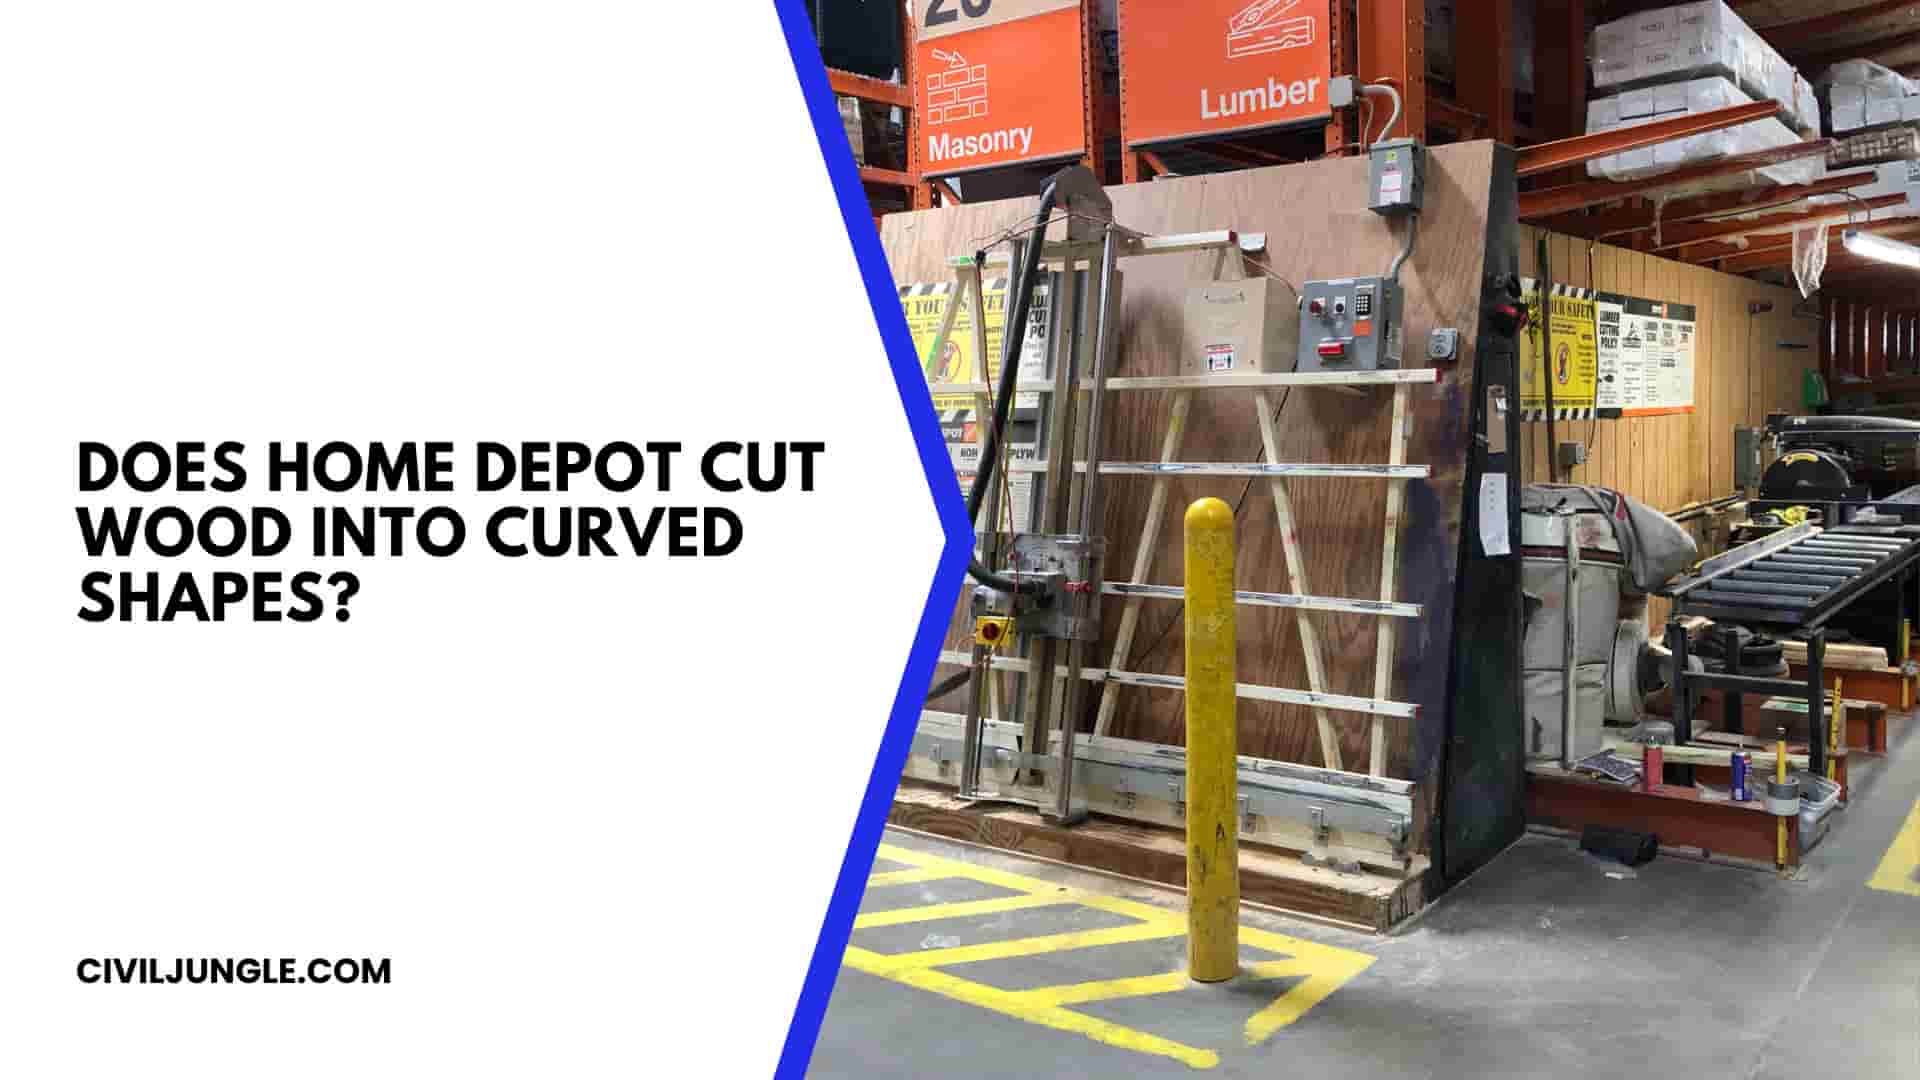 Does Home Depot Cut Wood Into Curved Shapes?